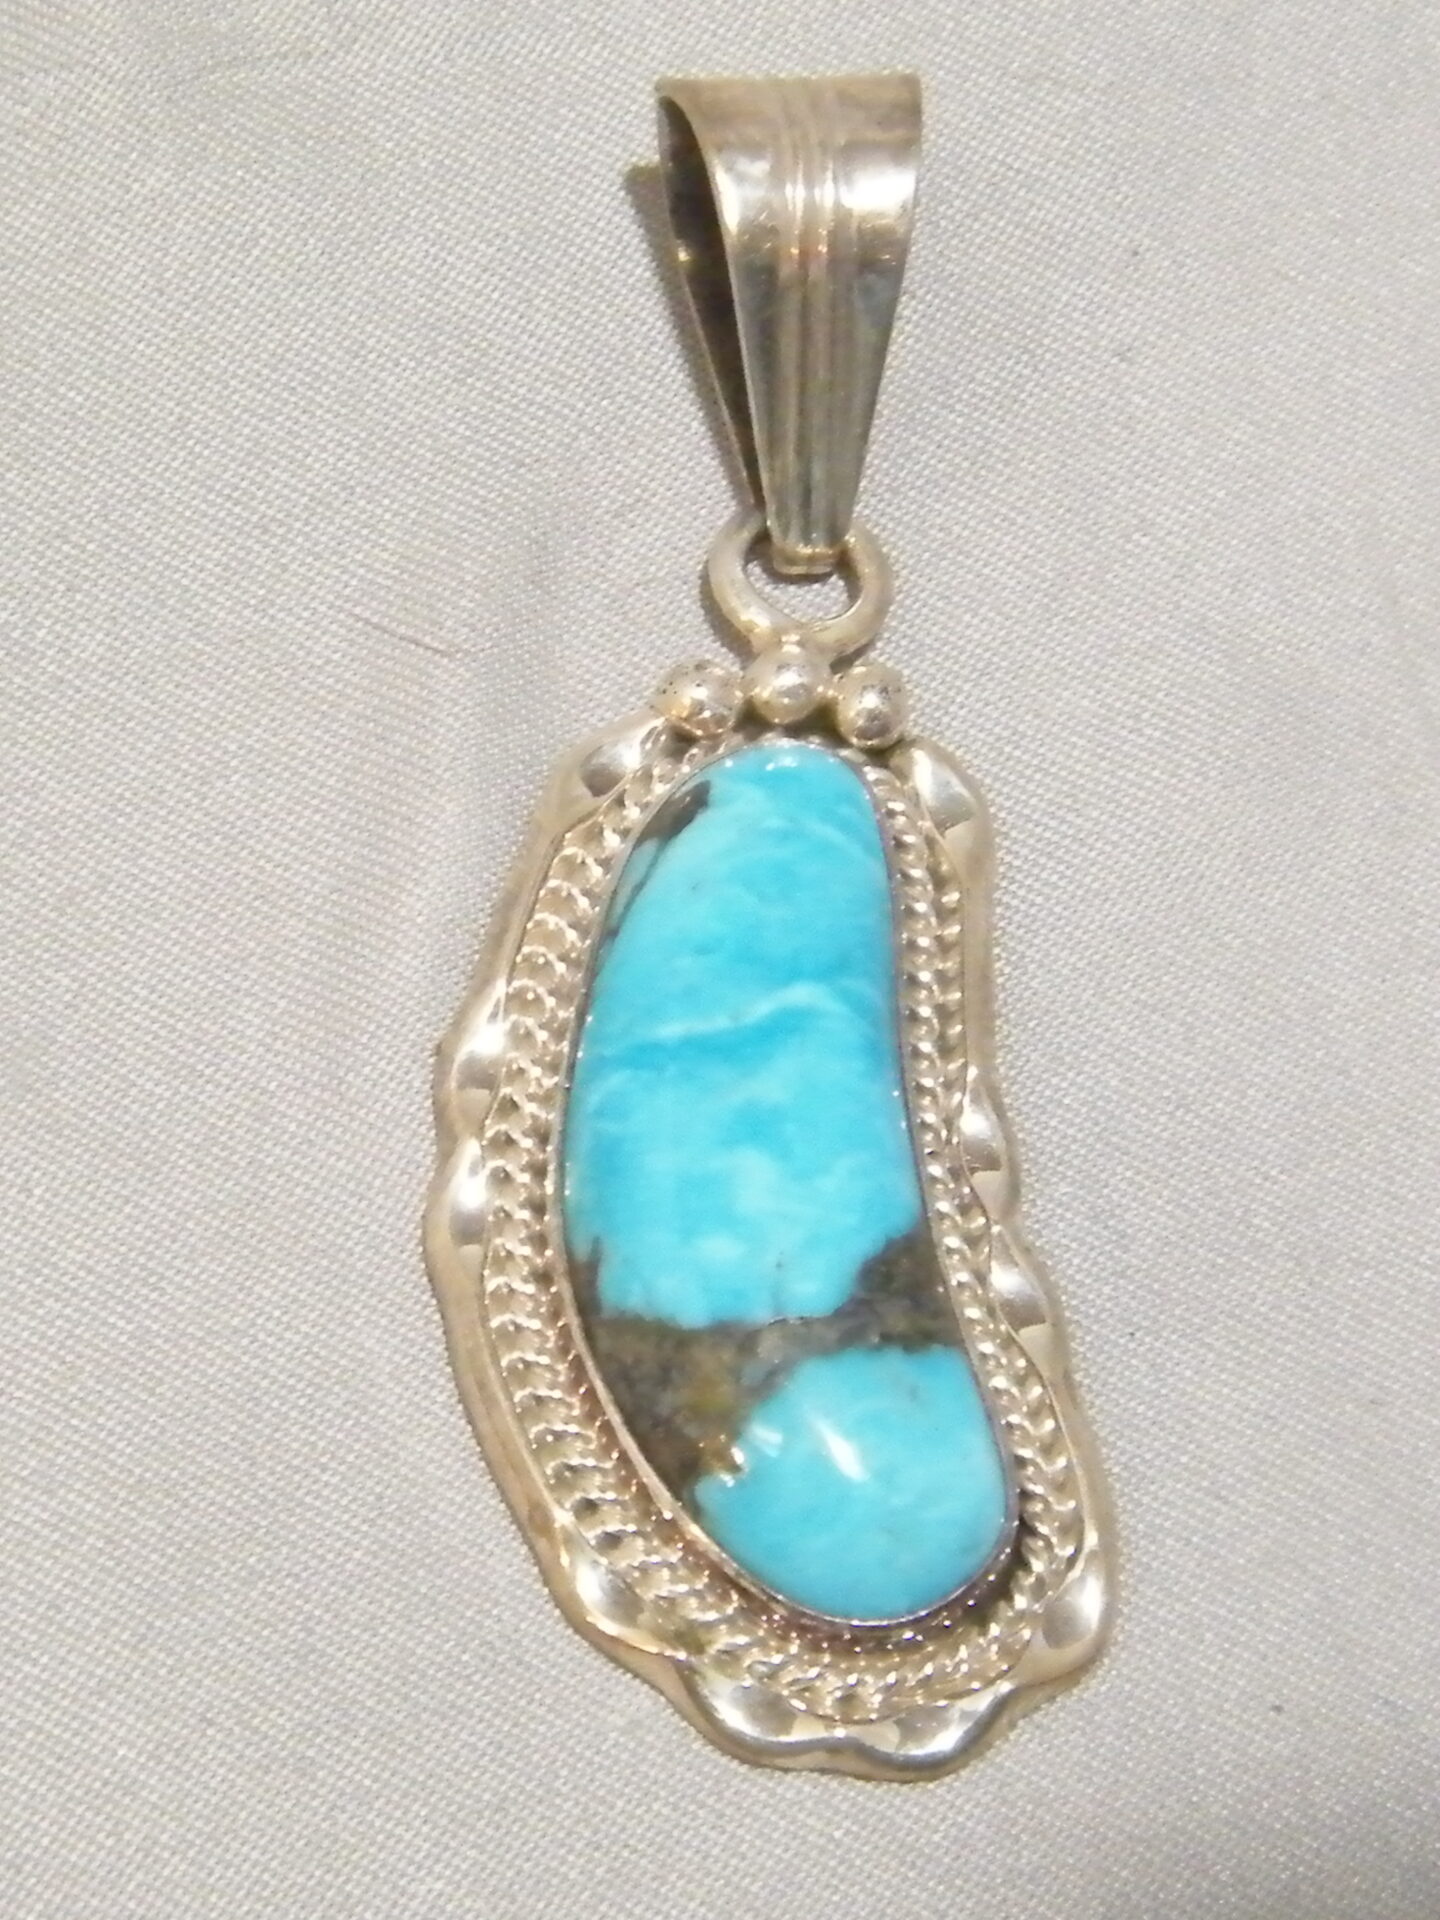 Turquoise Pendant Sterling Silver Native American Indian Samuel Yellowhair